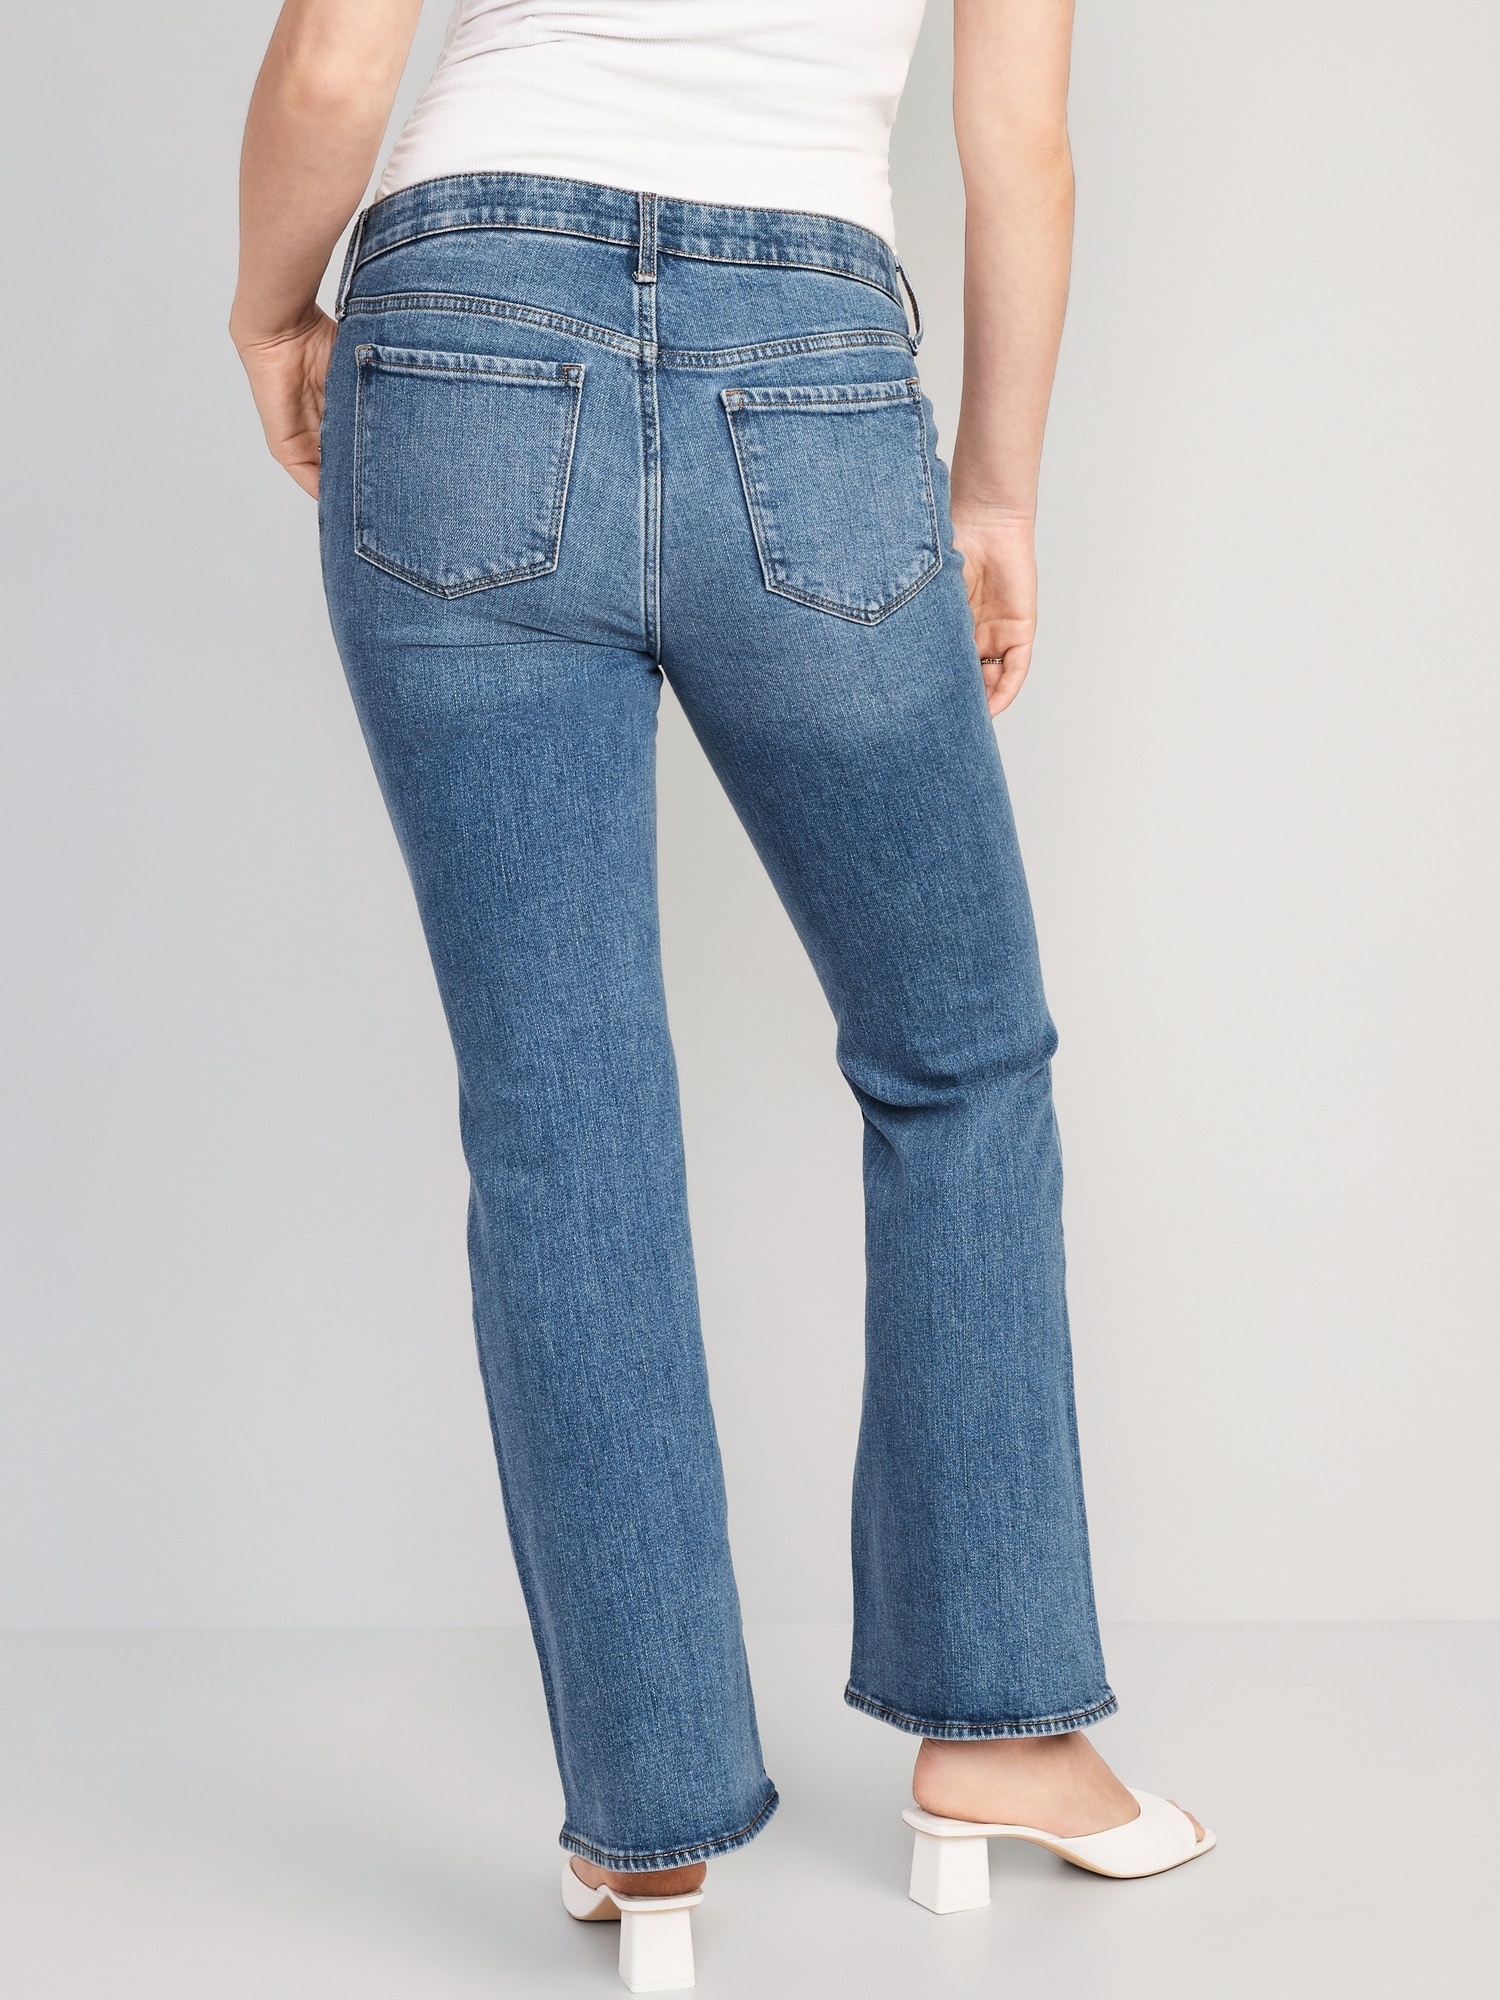 Jeans Navy Old | Flare Panel Front-Low Maternity